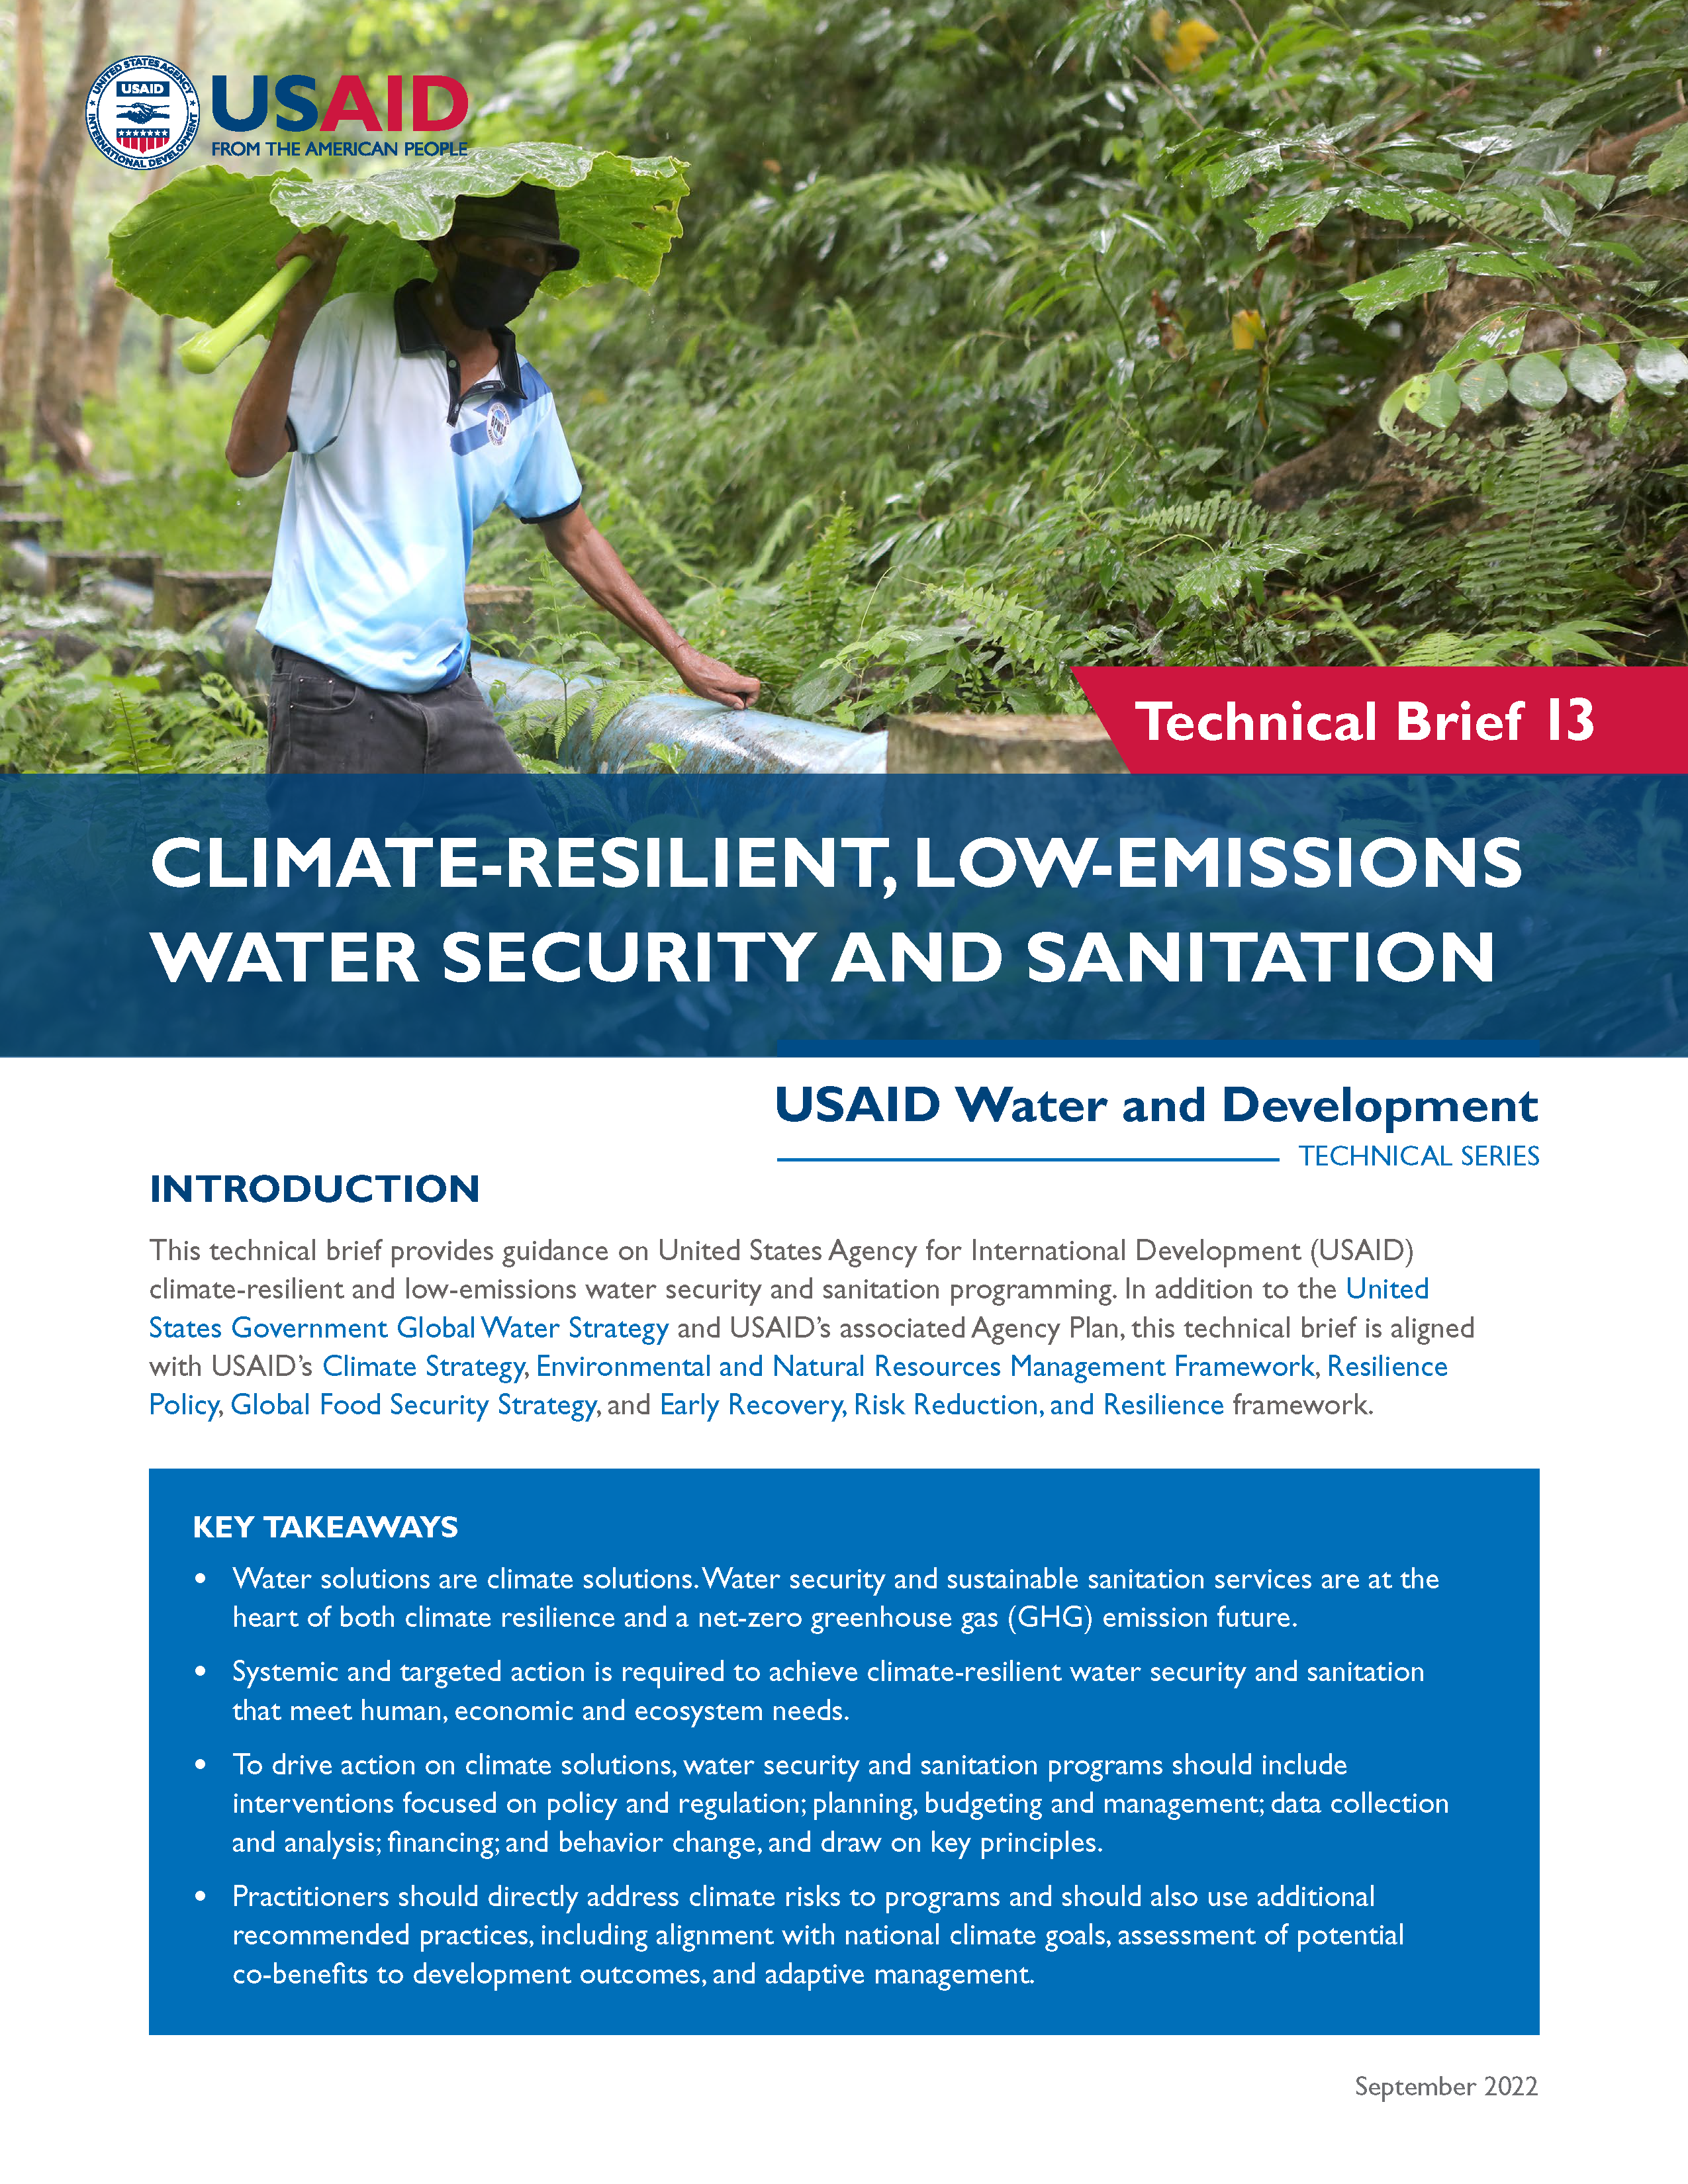 Cover page for Climate-Resilient, Low Emissions Water Security and Sanitation Technical Brief